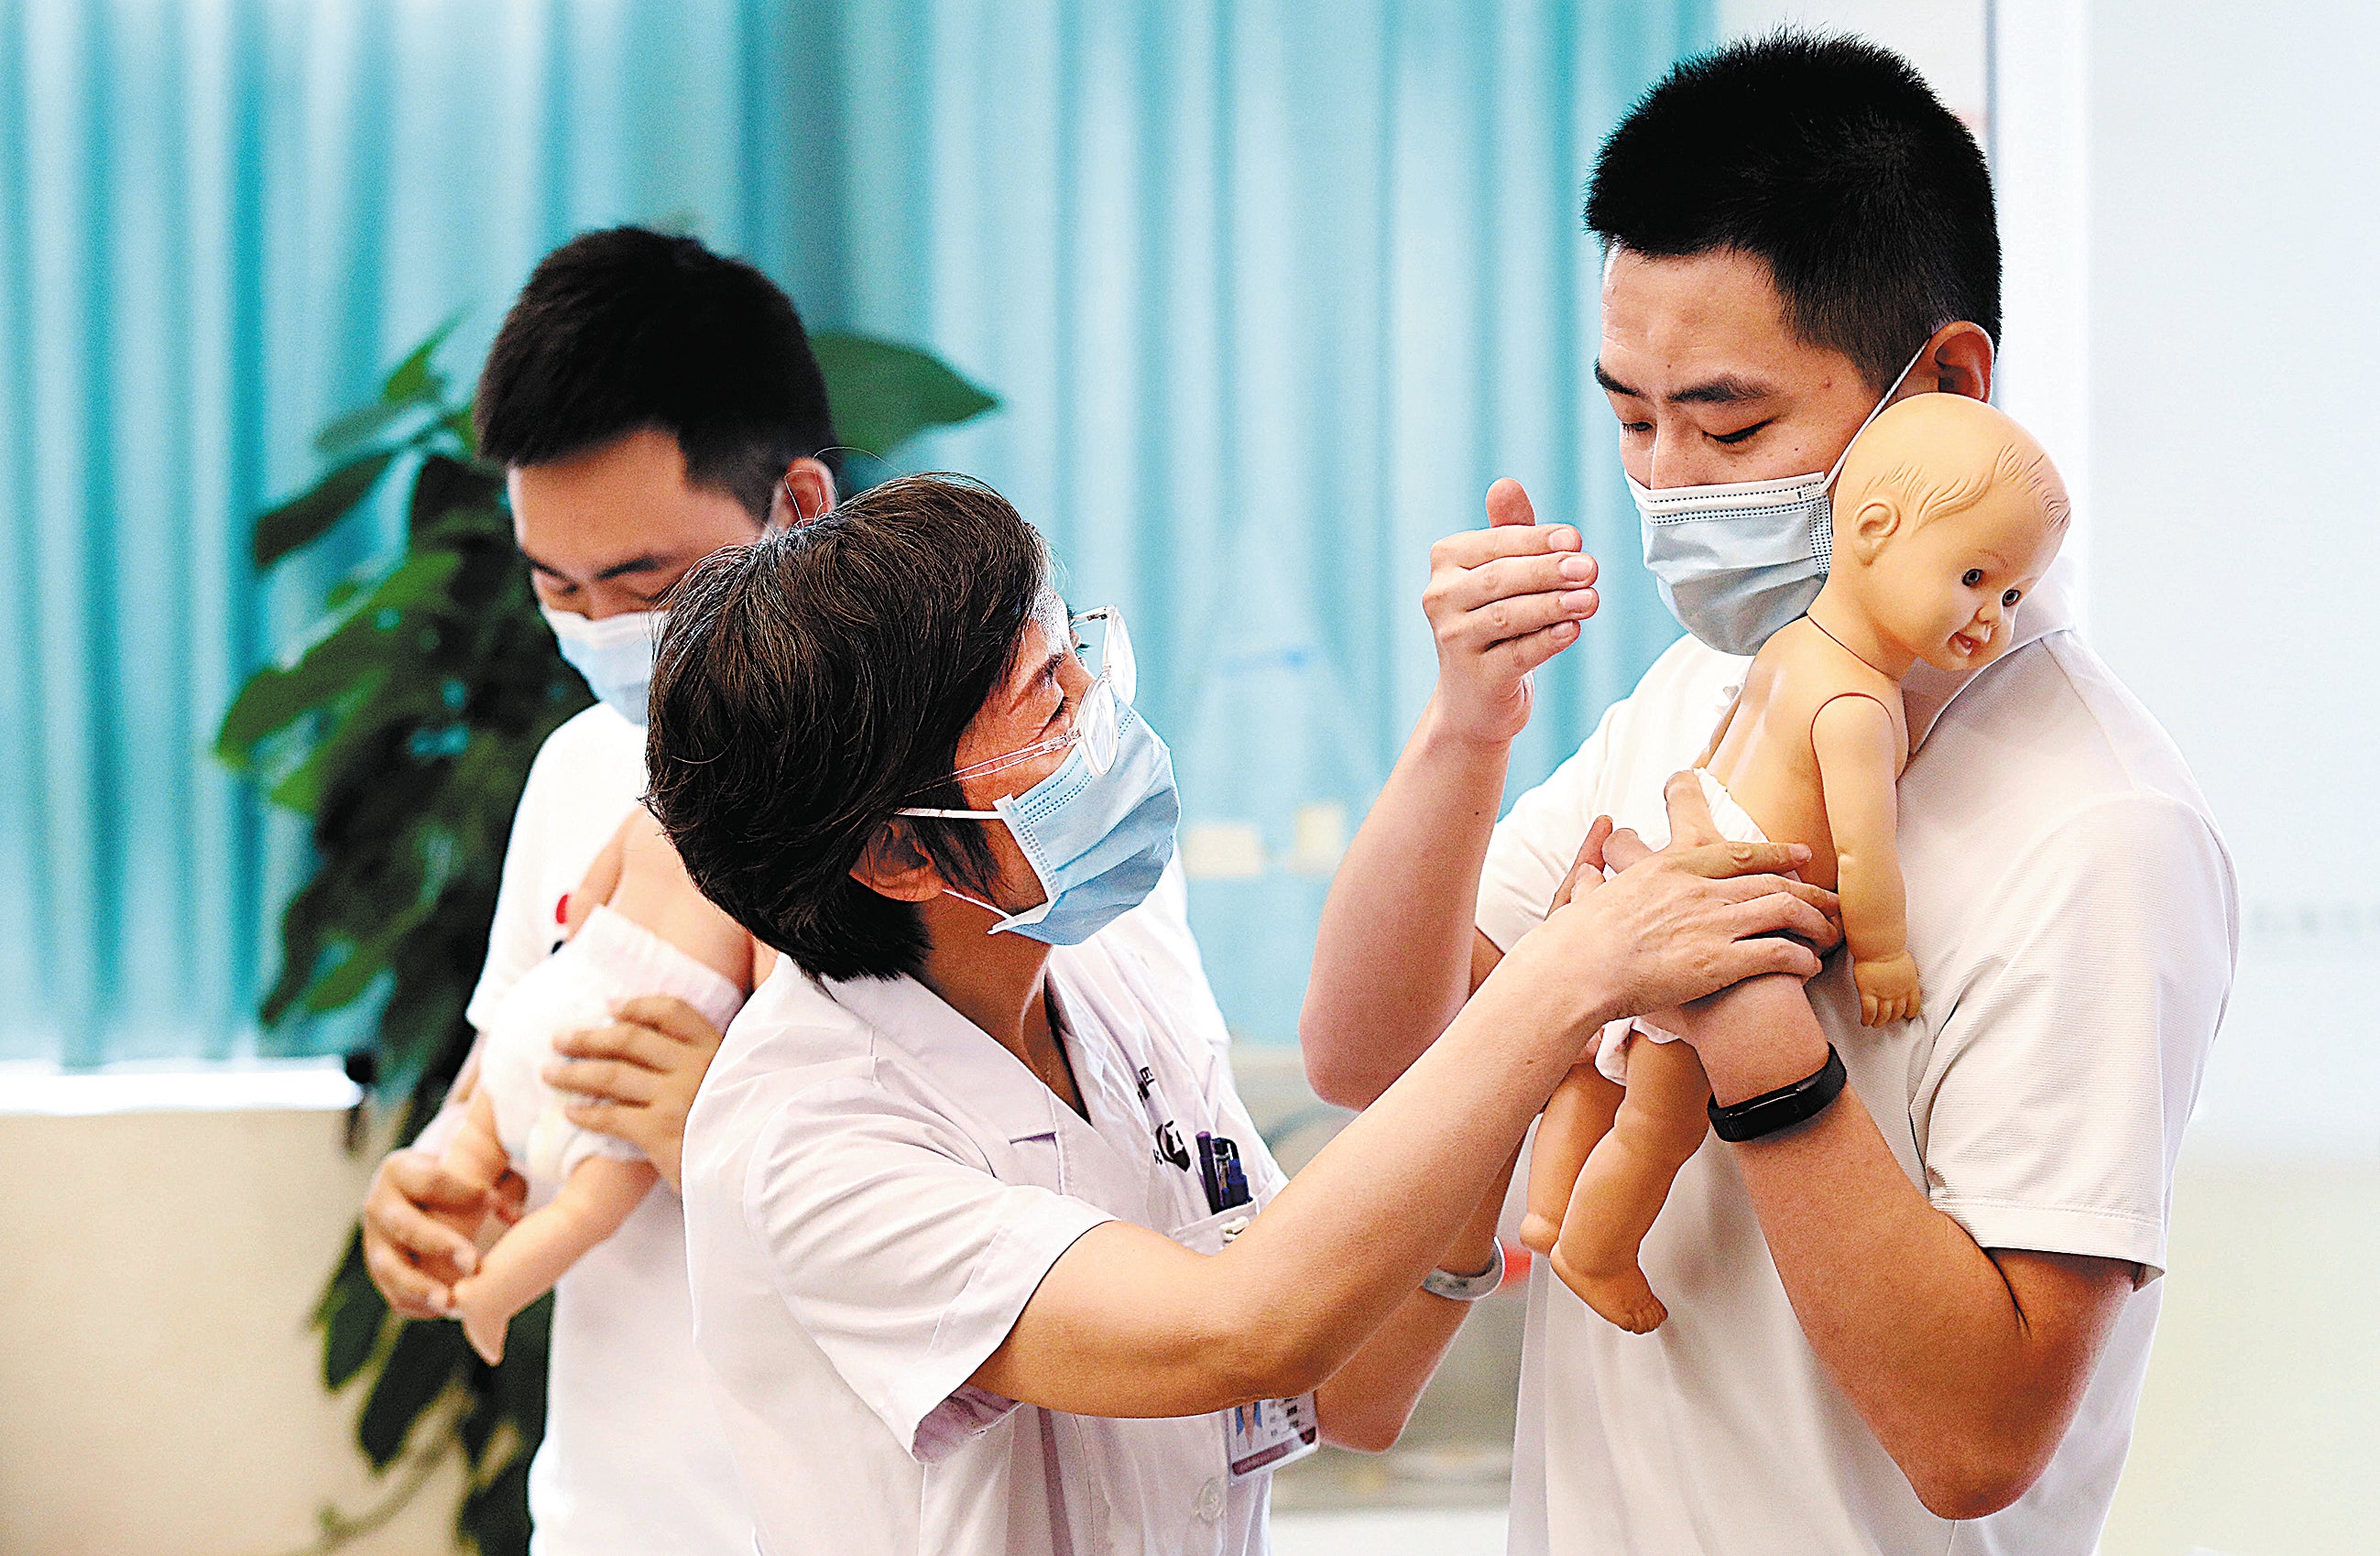 Fathers-to-be learn how to take care of babies at Shijiazhuang Obstetrics and Gynecology Hospital in Hebei province in July